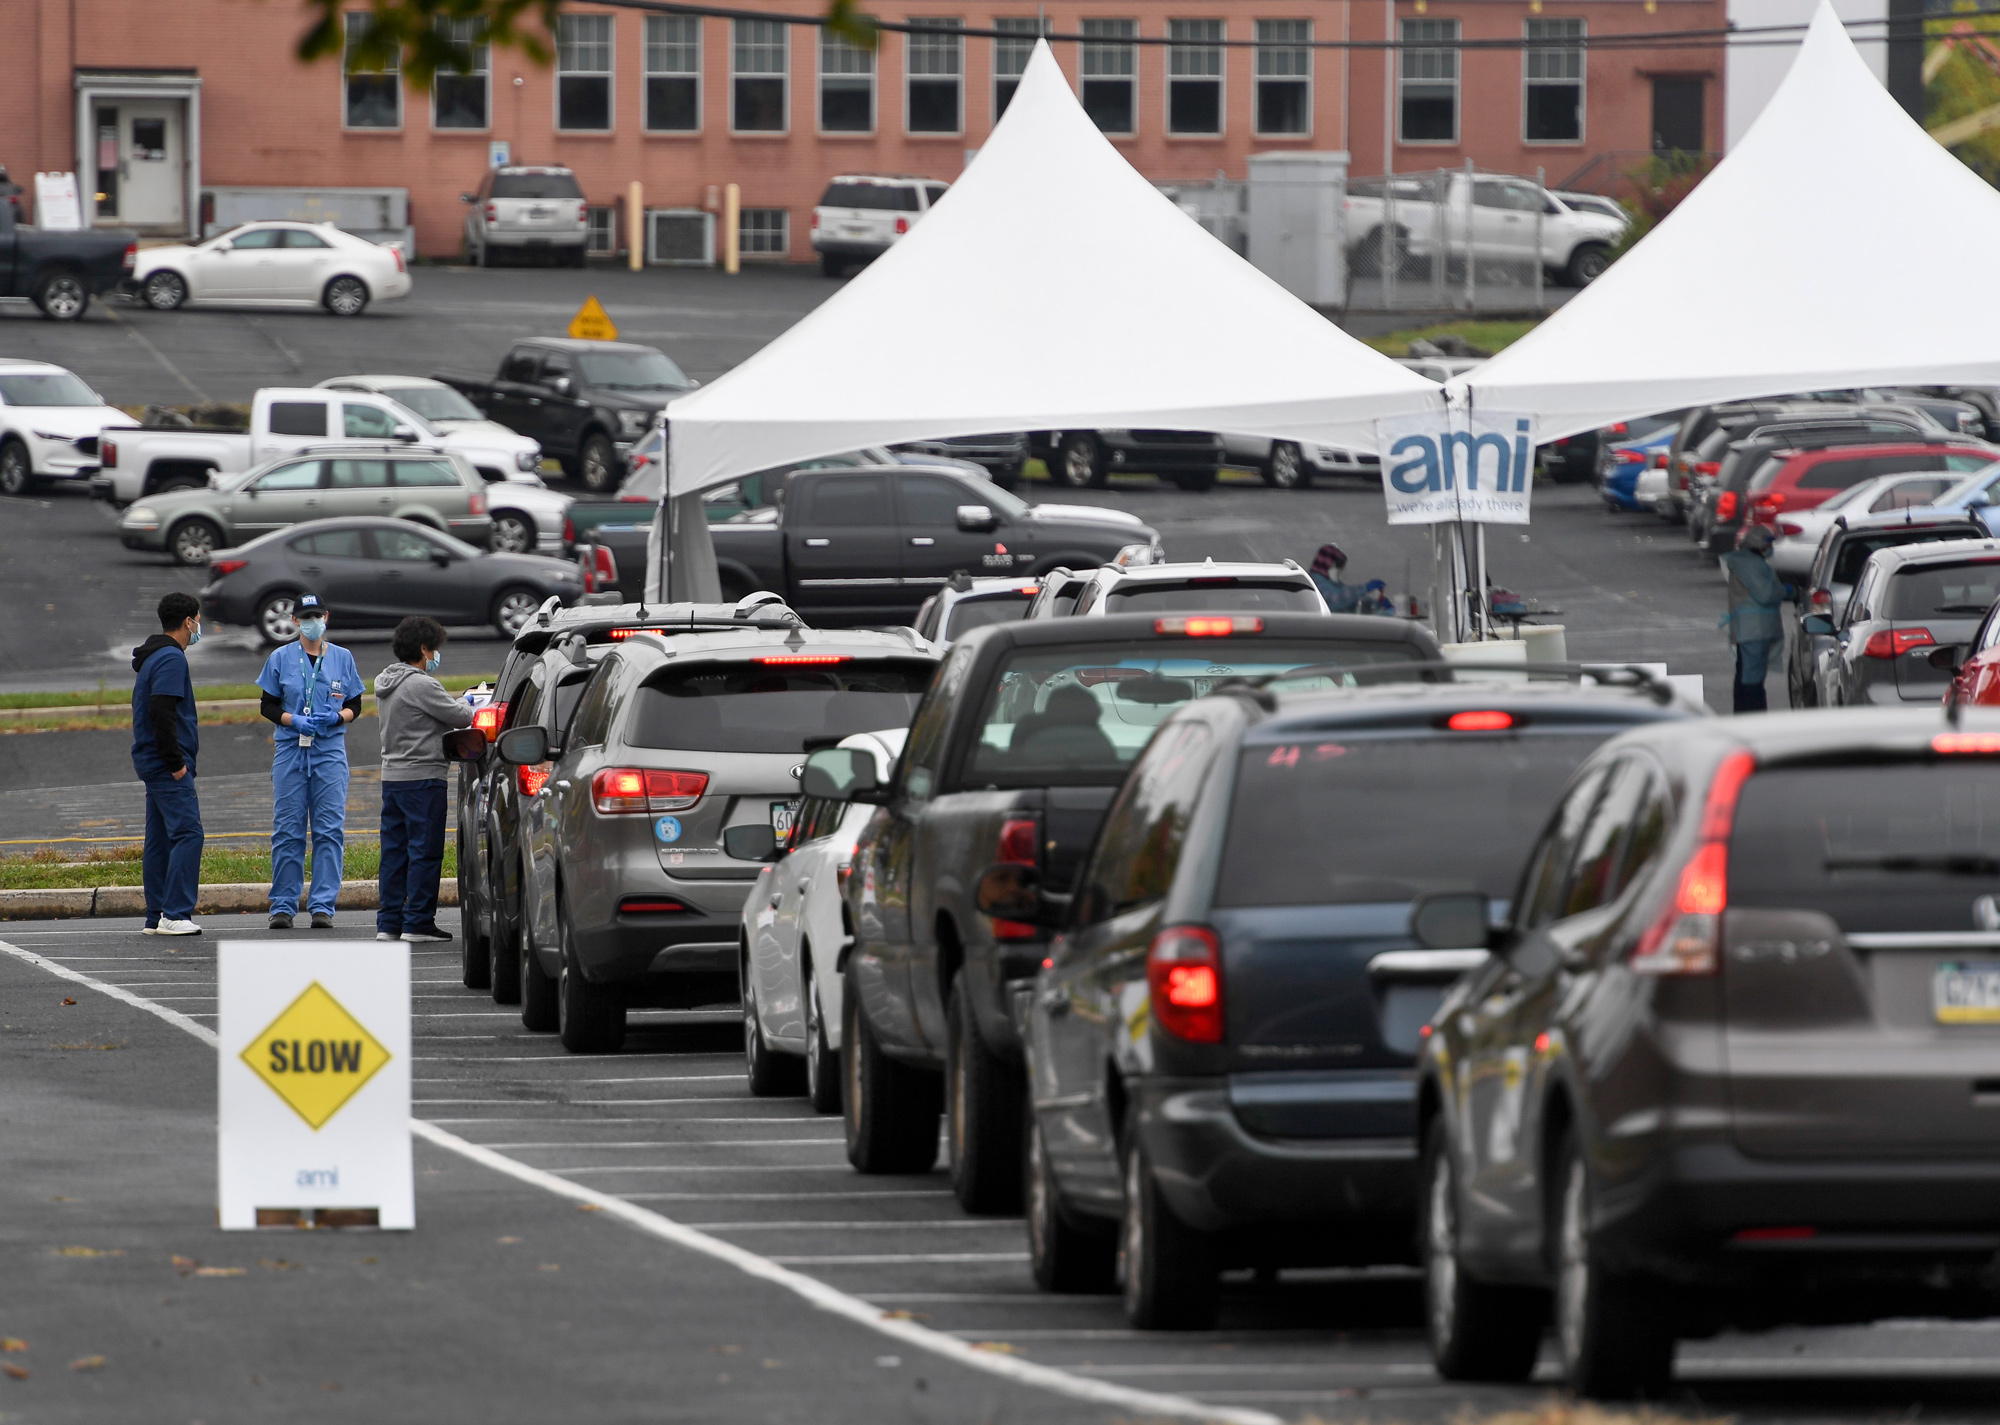 People in cars wait in line for COVID-19 testing in Reading, Pennsylvania, outside FirstEnergy Stadium on October 13.